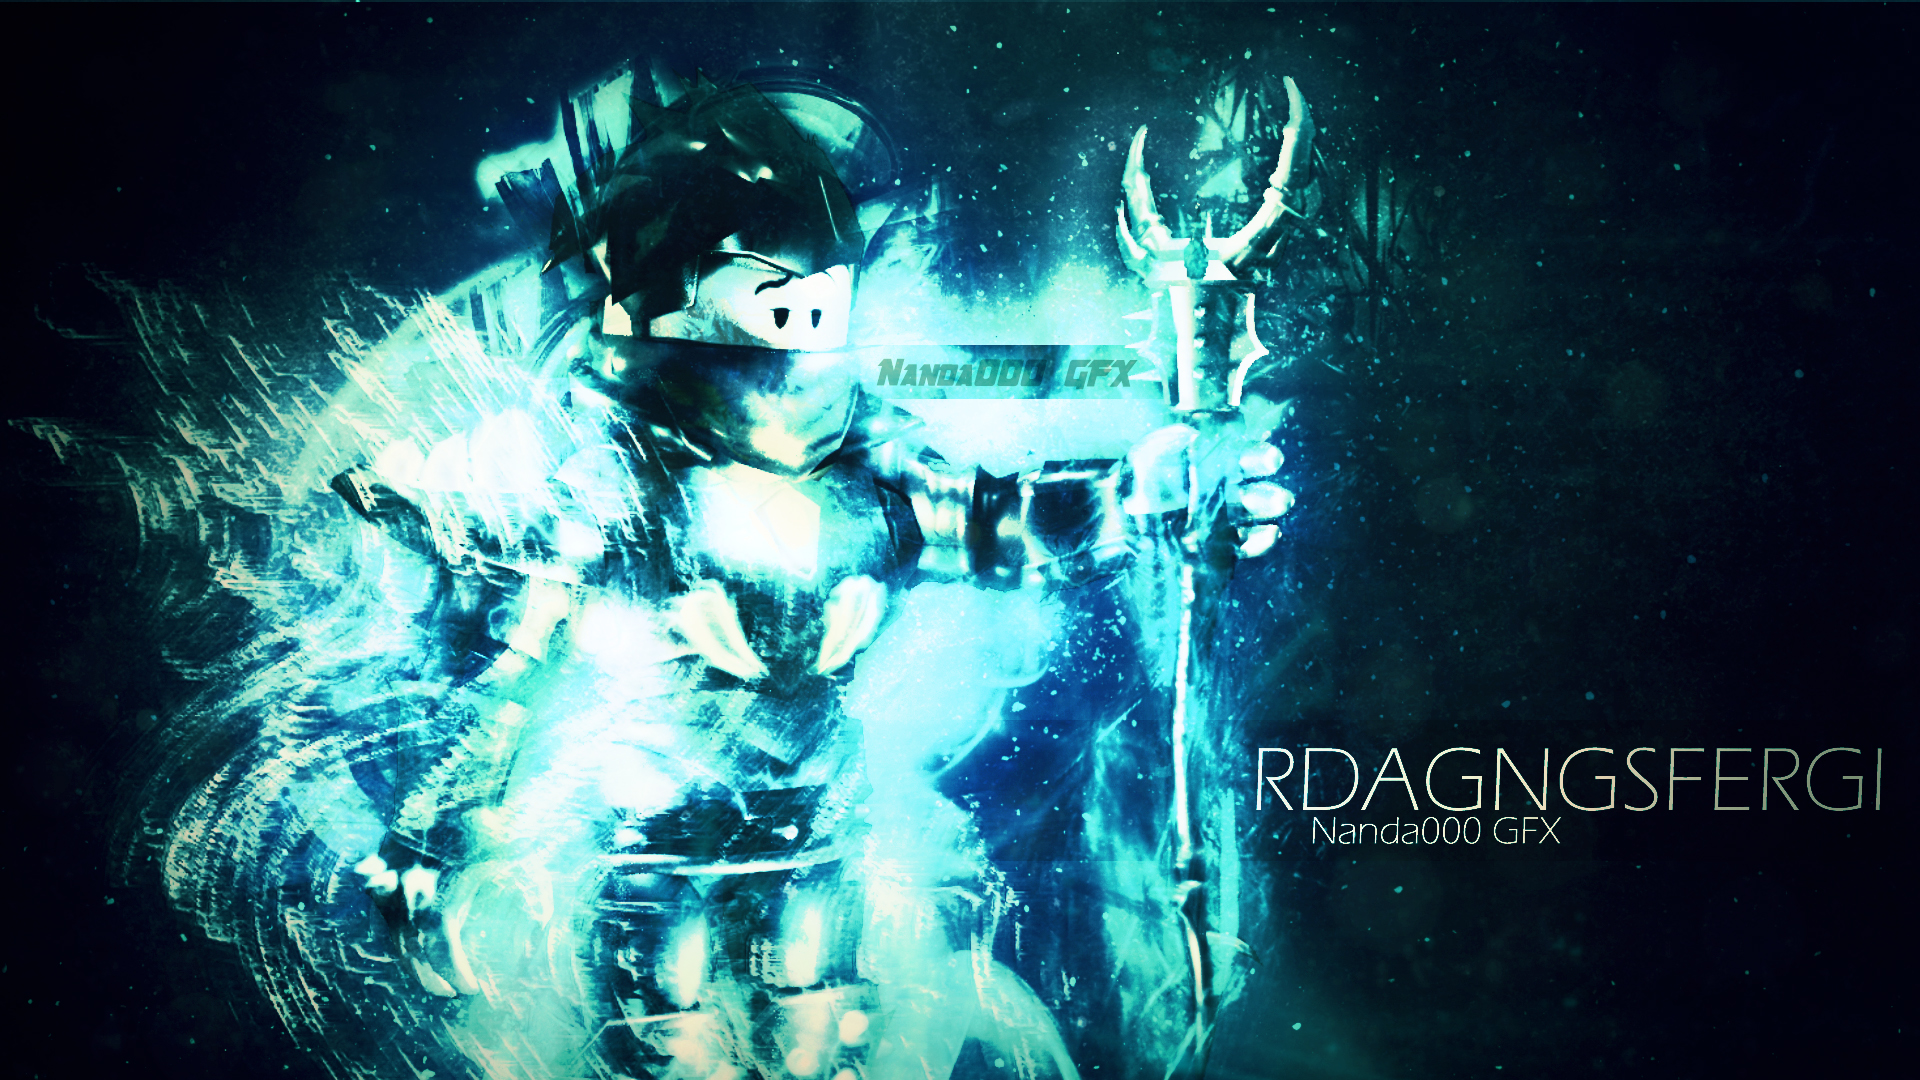 A Roblox Gfx By Nanda000 For Rdagngsfergi By Nandamc On - a roblox gfx by nanda000 for leeliqs by nandamc on